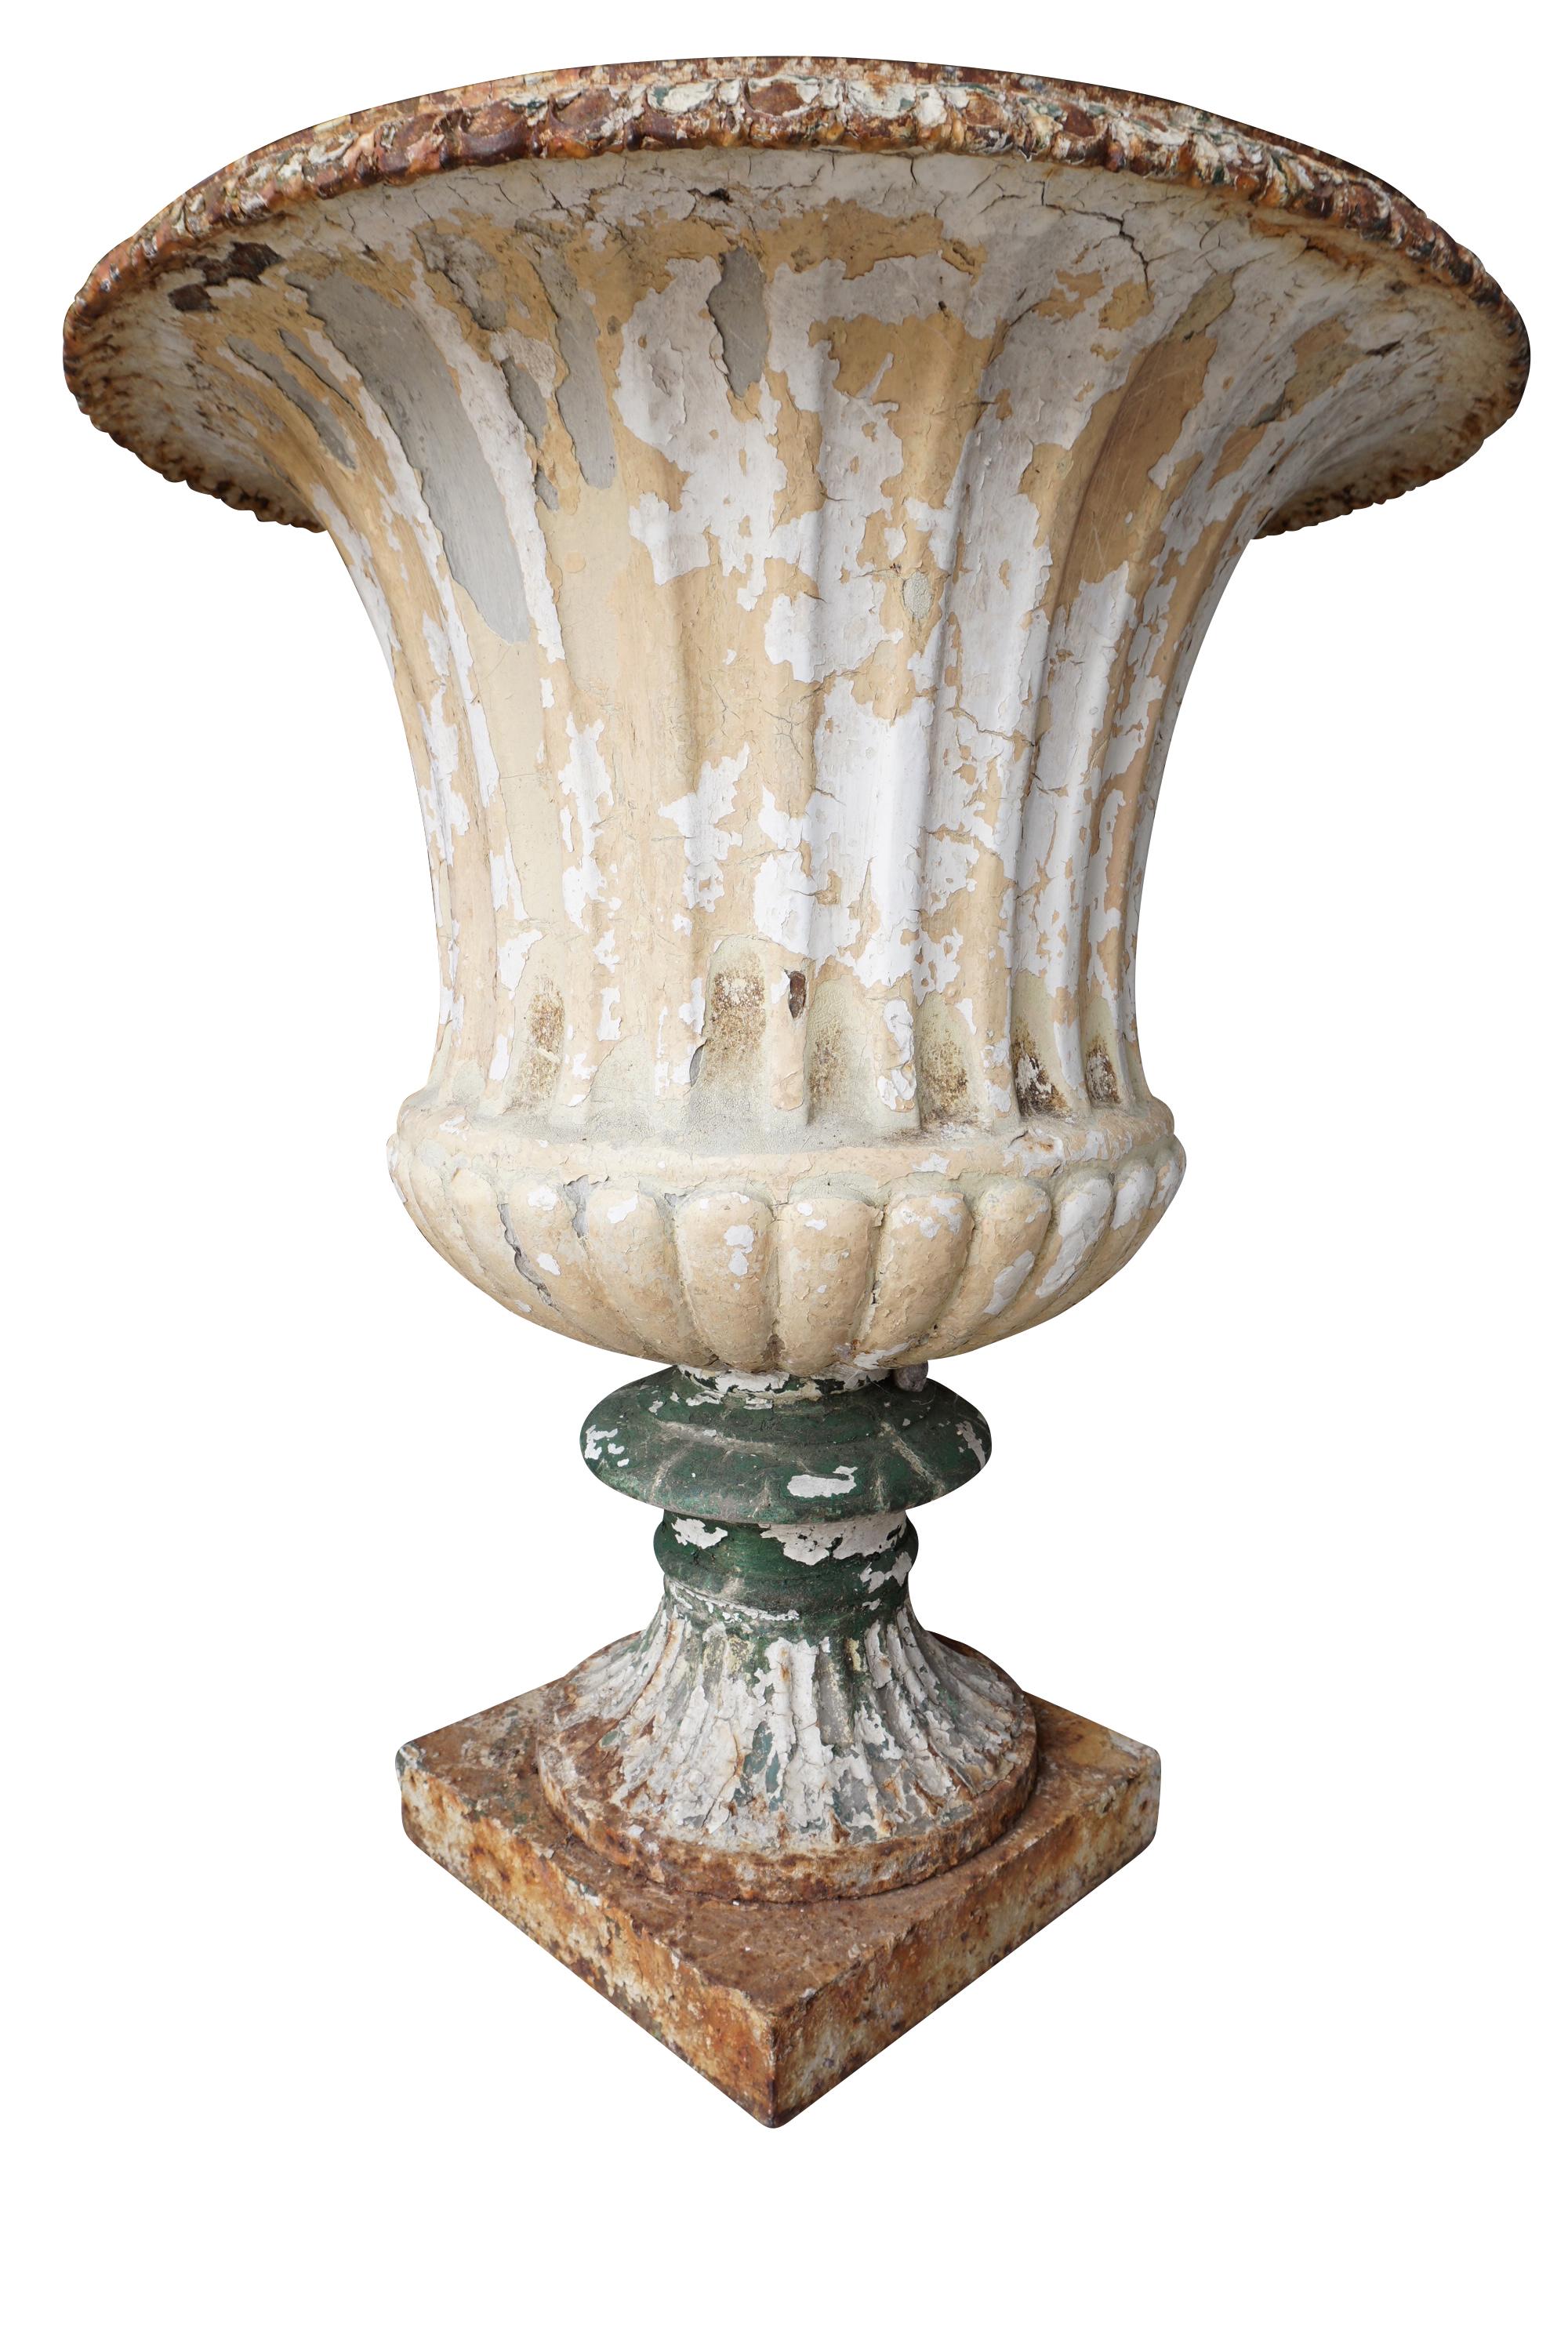 An impressive pair of Handyside cast iron garden urns with fluting, on turned socle and square plinth base

Andrew Handyside bought the Britannia Iron Works in 1848, they were renowned for the quality of their castings and were commissioned to